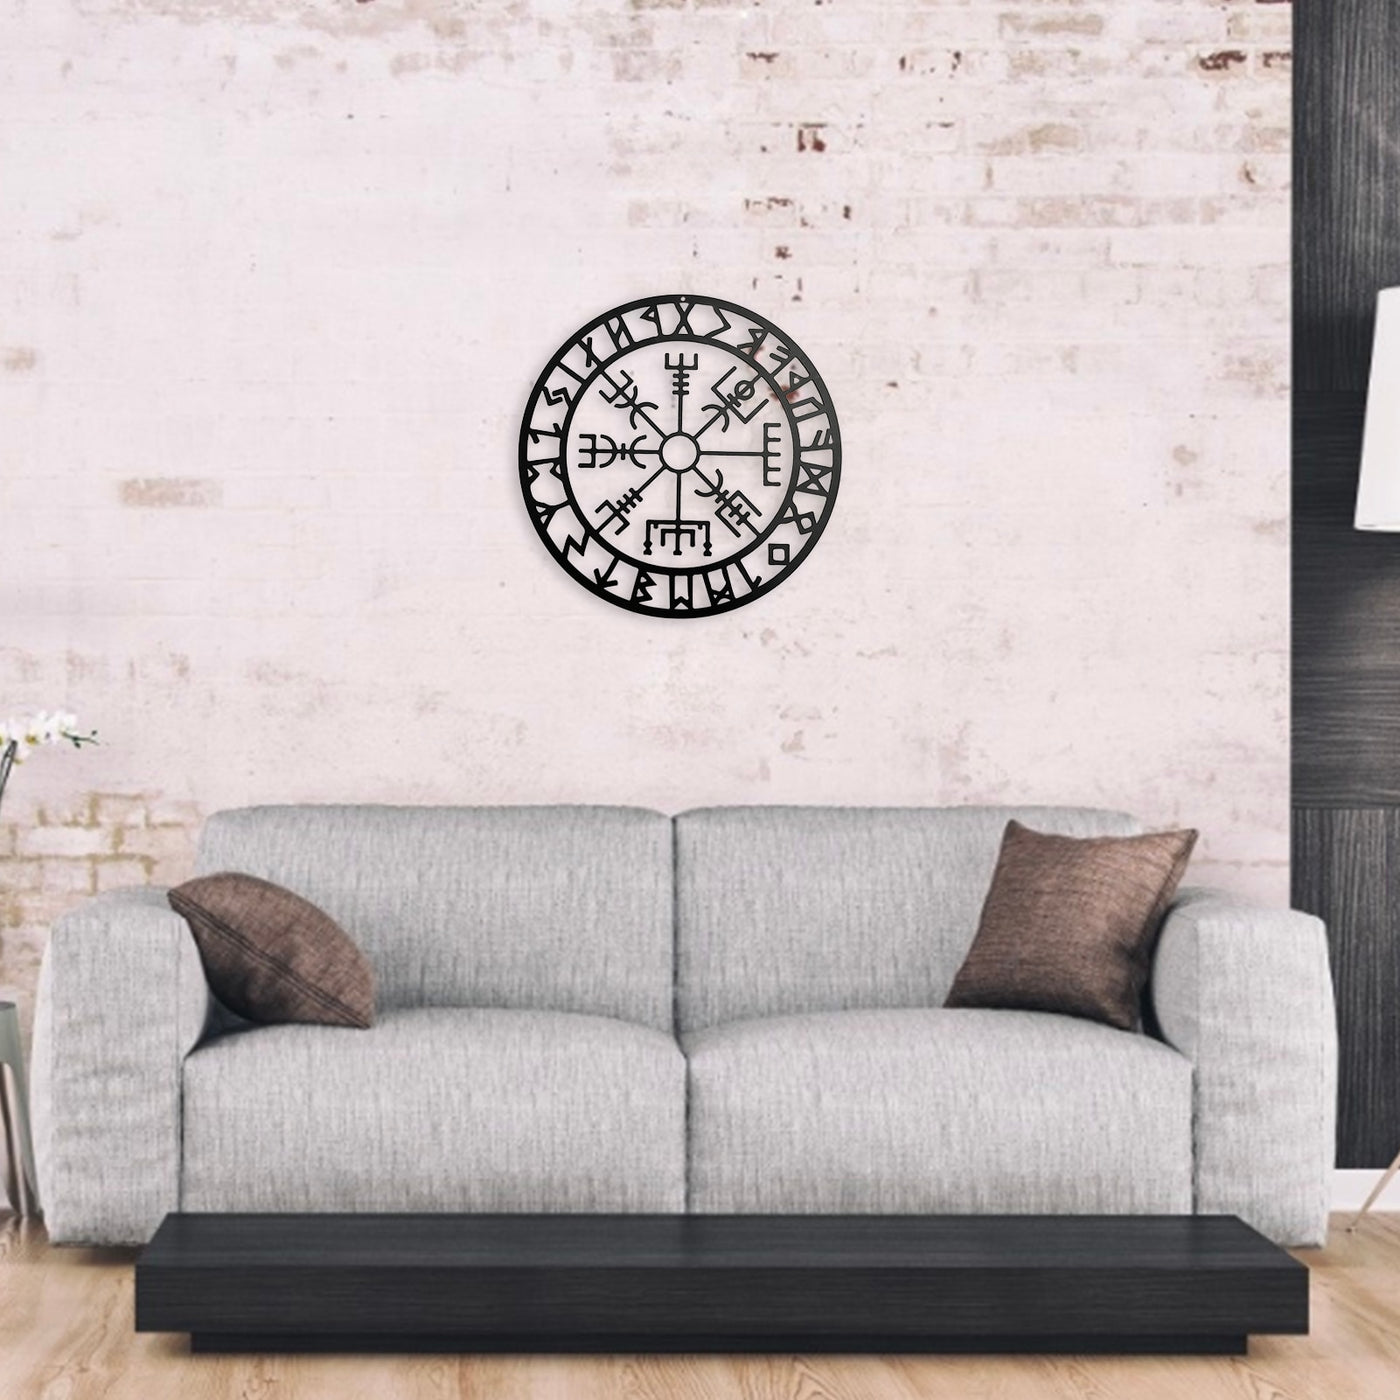 NORSE WALL DECORATIONS- VARIETY